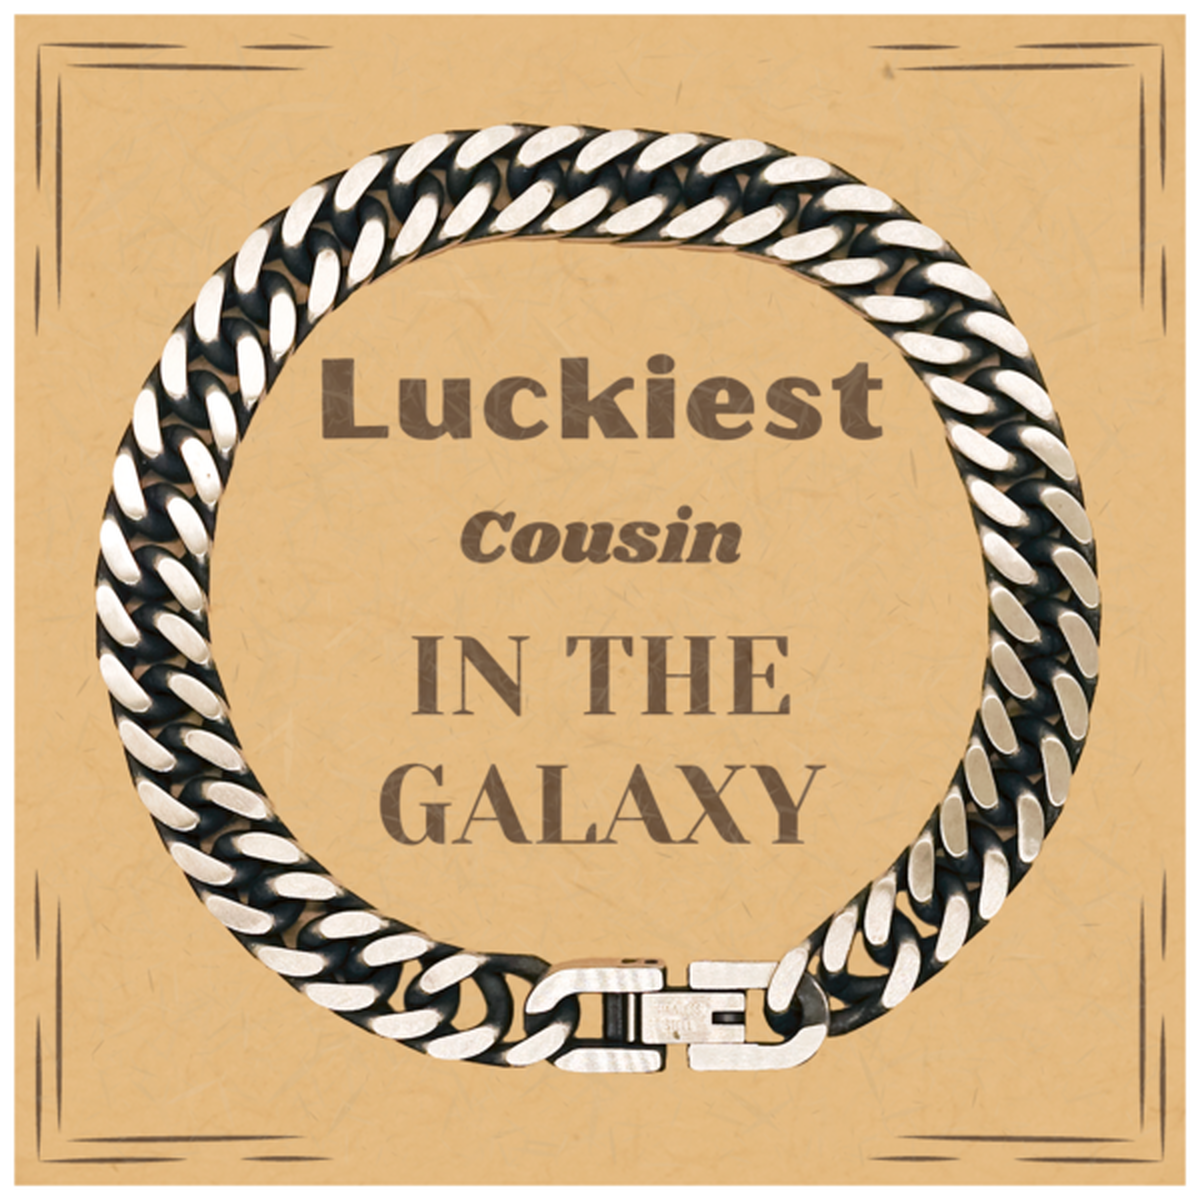 Luckiest Cousin in the Galaxy, To My Cousin Message Card Gifts, Christmas Cousin Cuban Link Chain Bracelet Gifts, X-mas Birthday Unique Gifts For Cousin Men Women